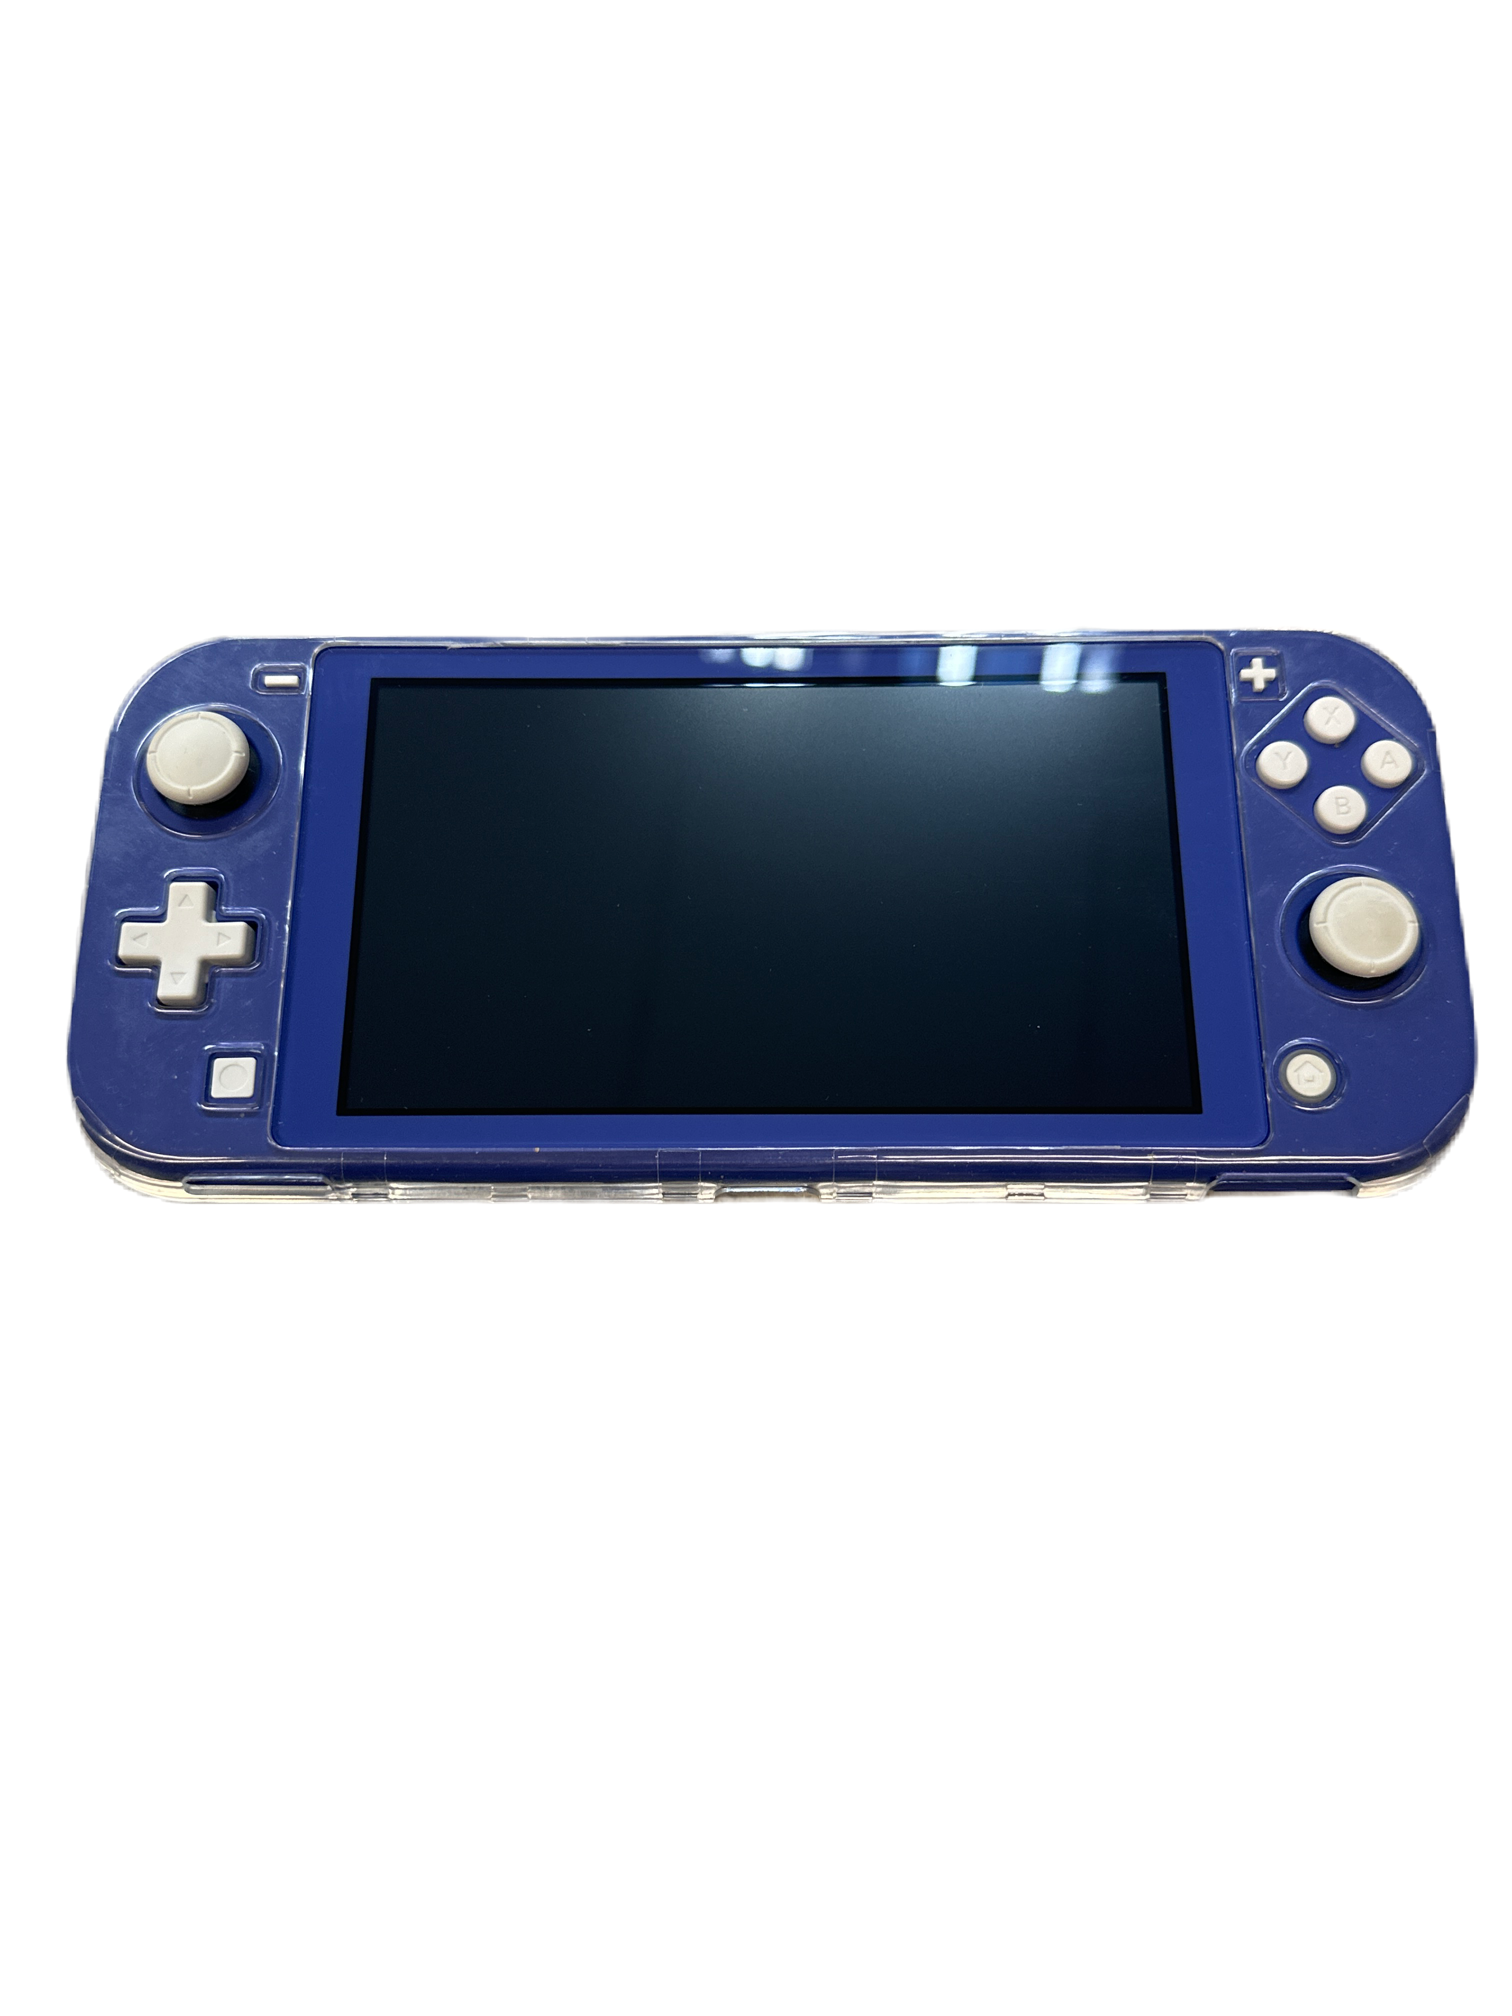 Nintendo Switch Lite - Blue - Charger/Clear Case